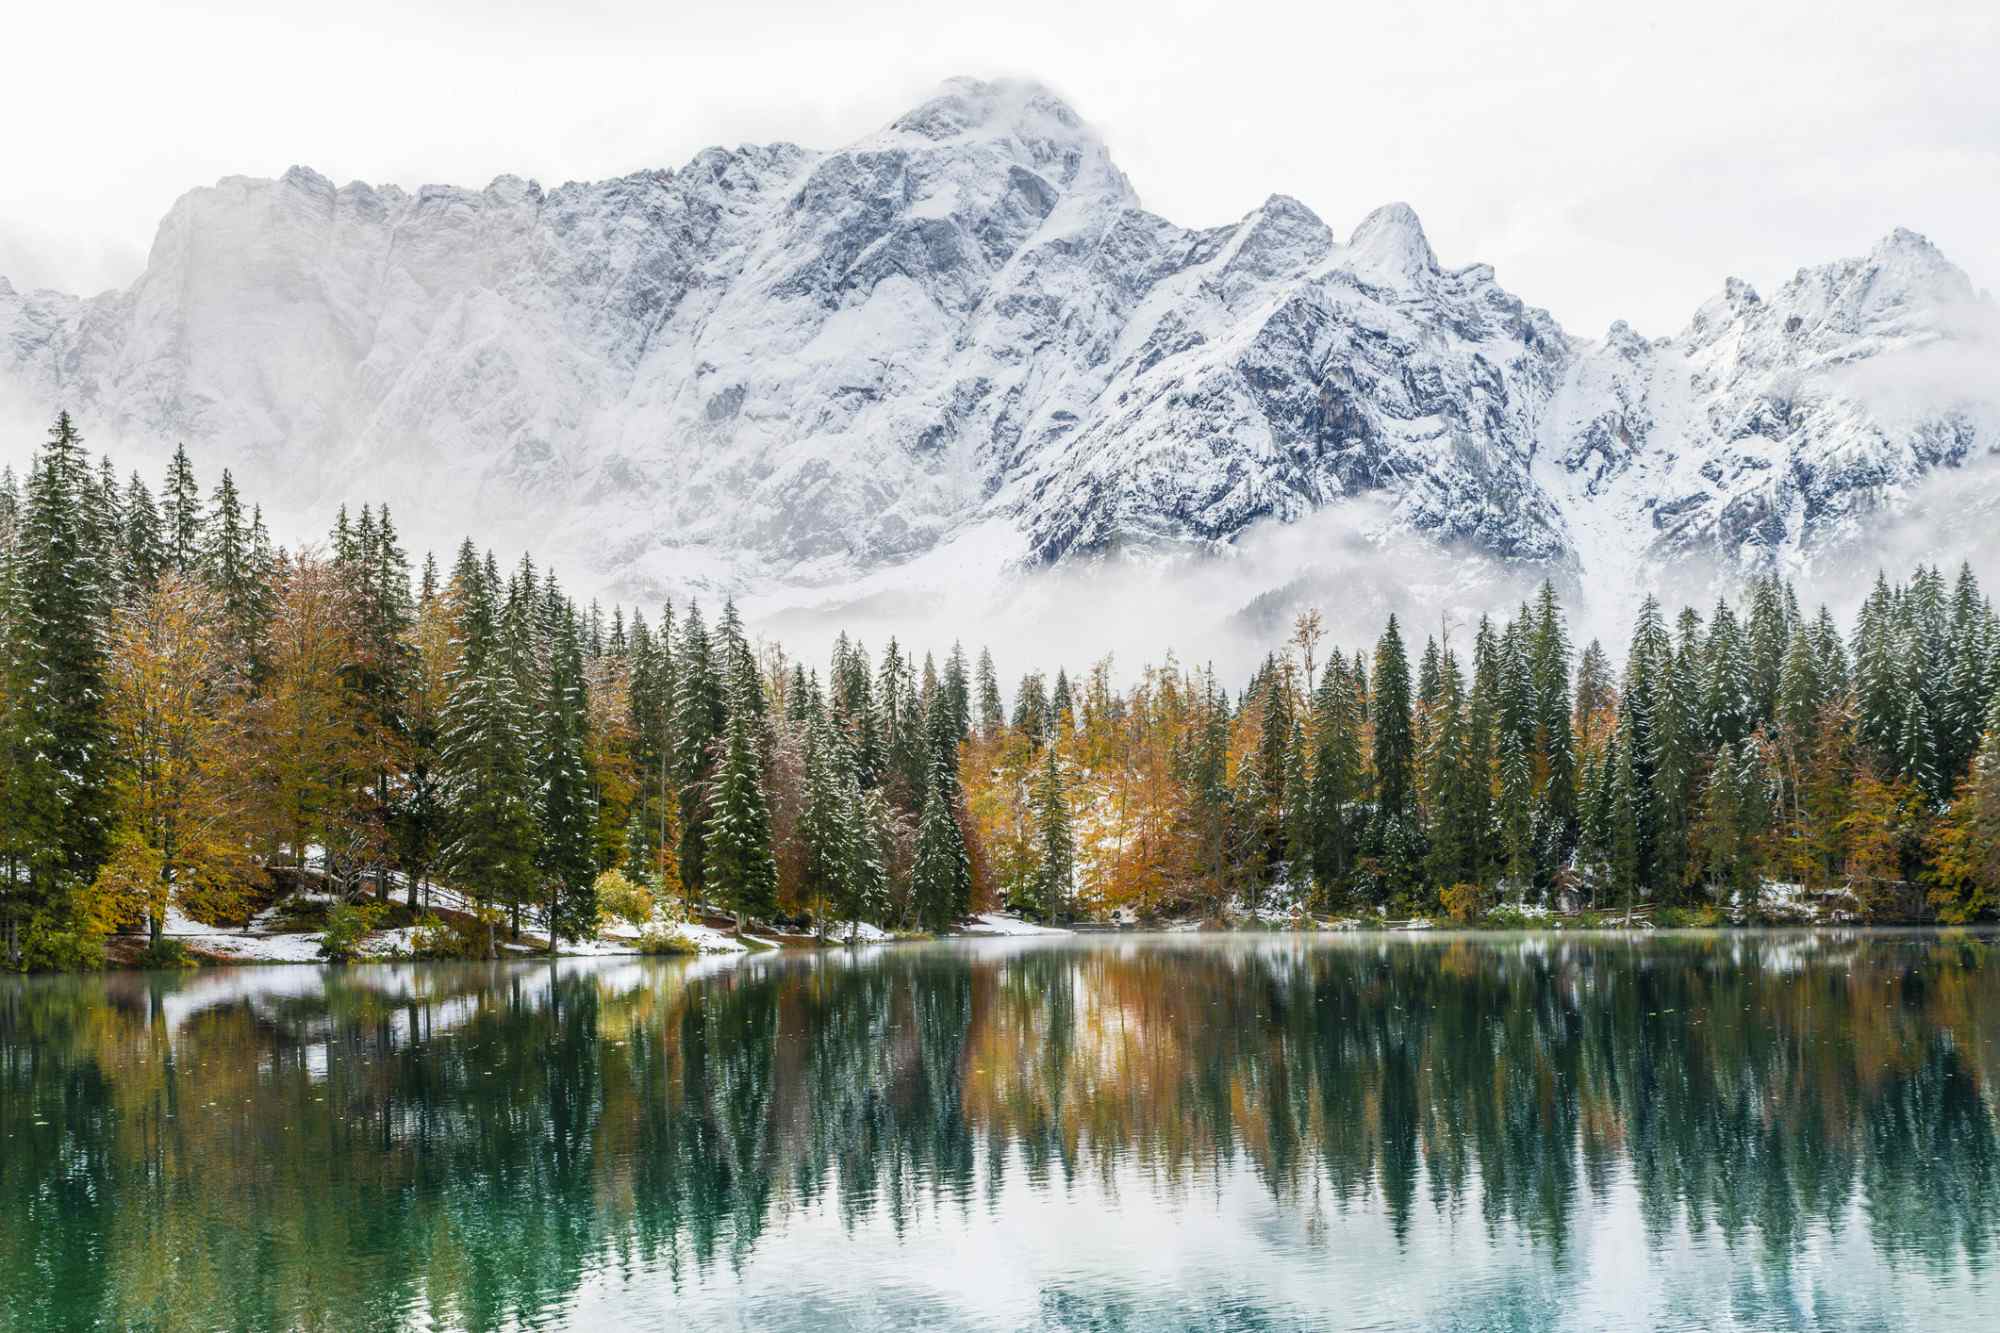 Snowy mountains and pine trees mirrored in Fusine Lake, Italy